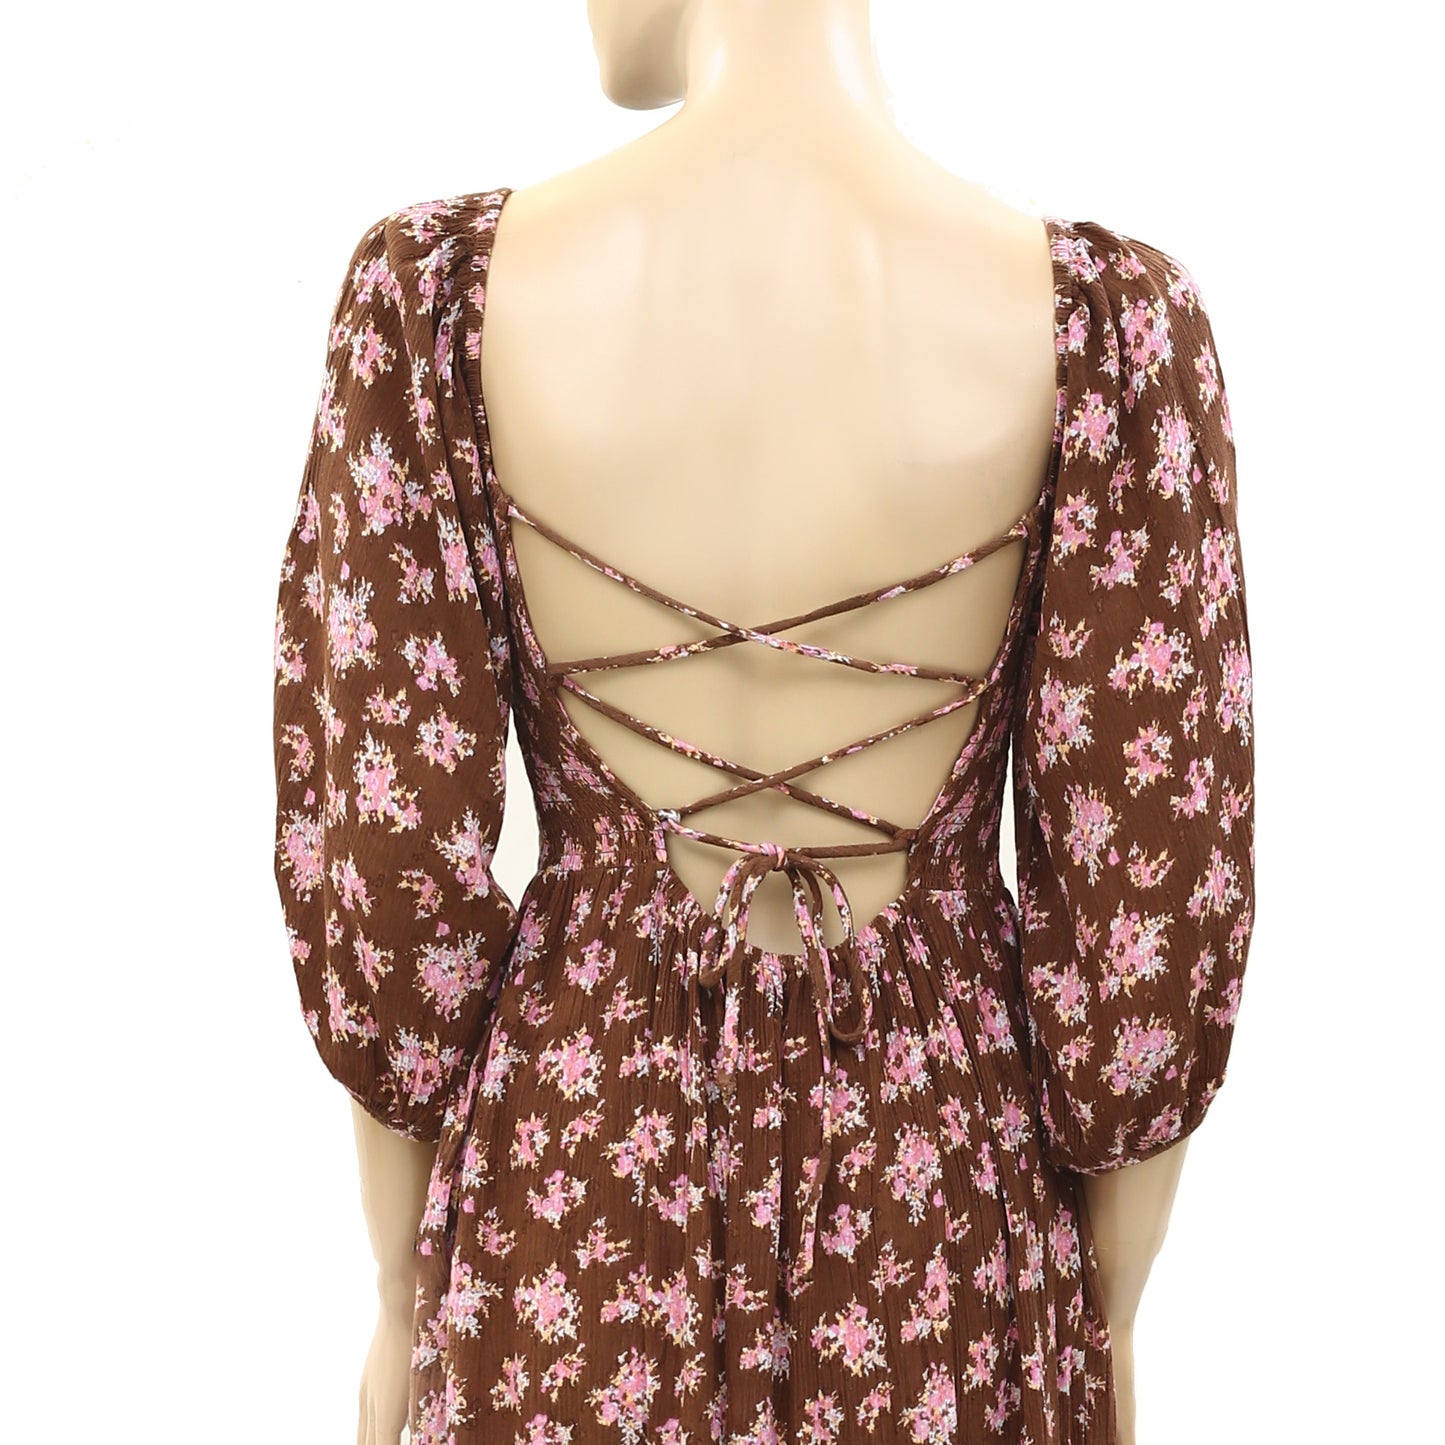 Urban Outfitters UO Lottie Chocolate Floral Tie-Back Midi Dress